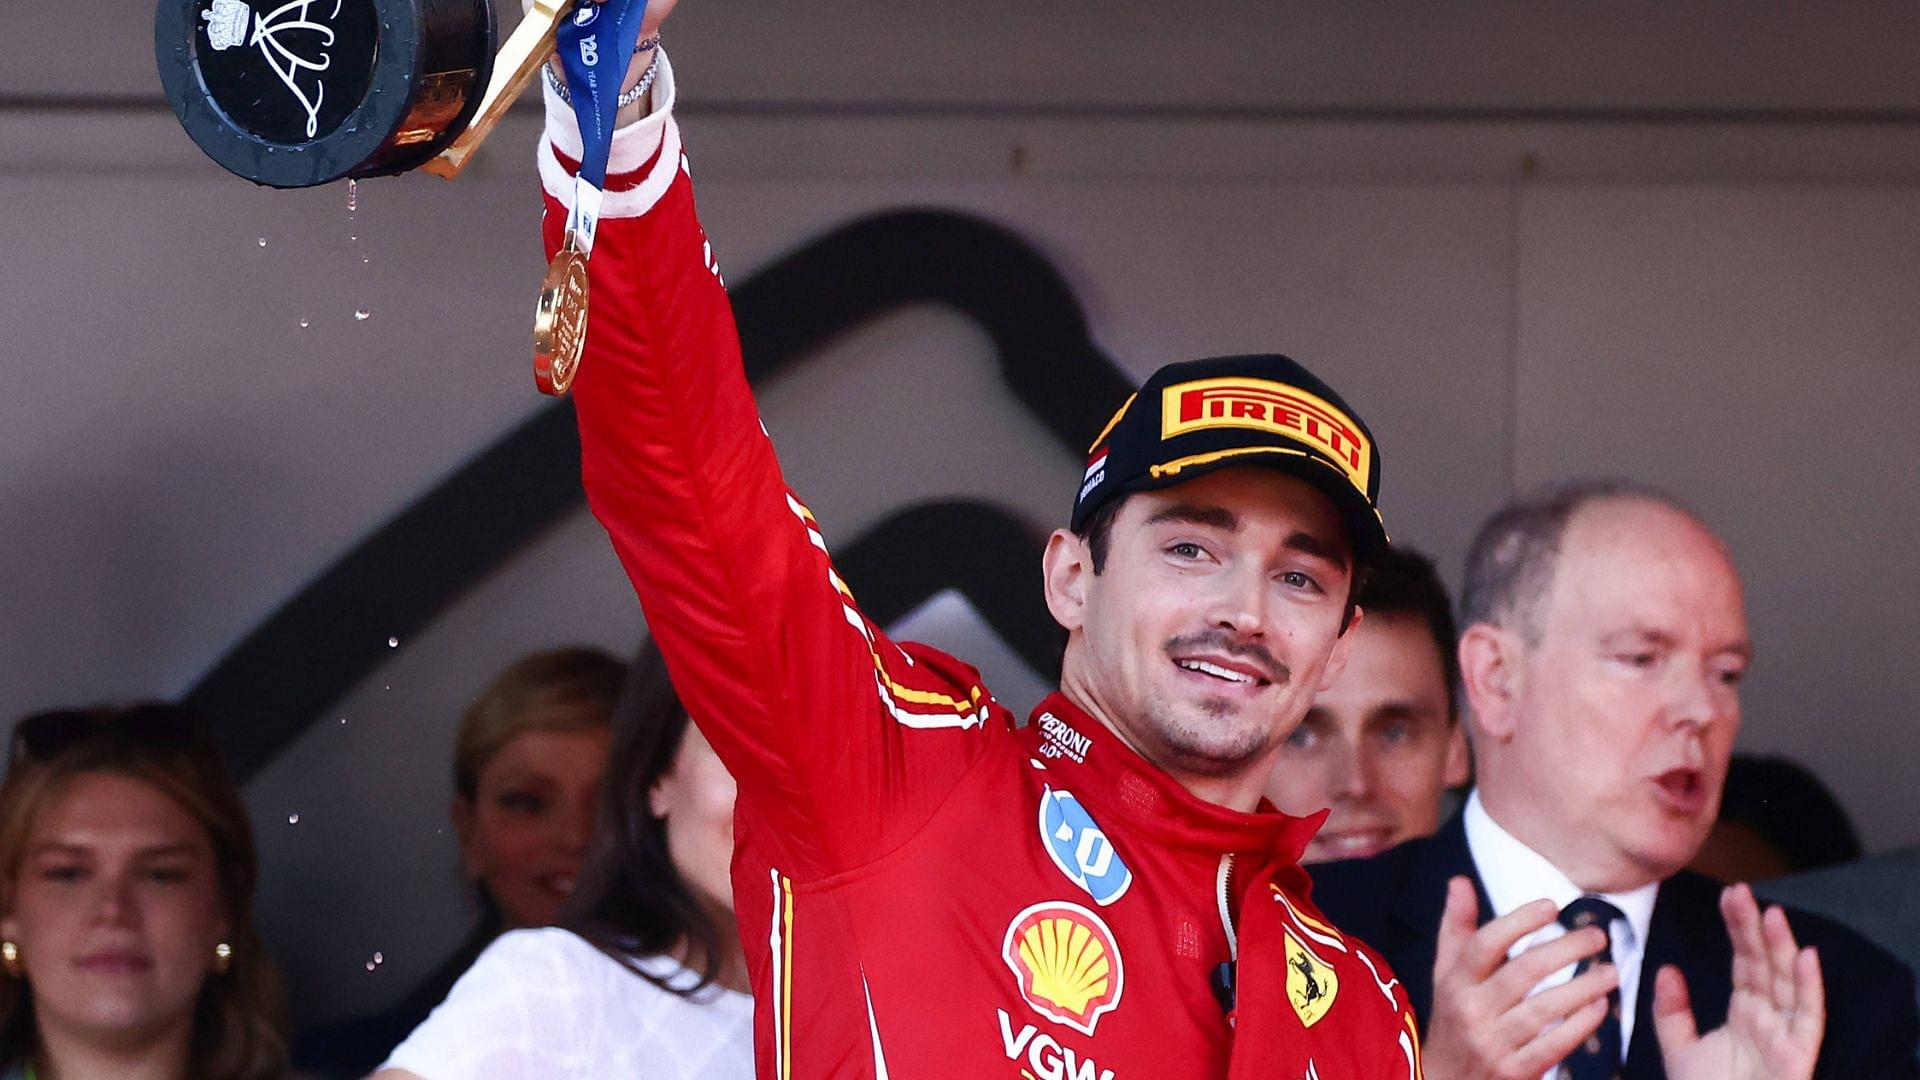 Breaking the Monaco Curse, Charles Leclerc Gets Adorned With ‘Drove Like a Champion’ Remark